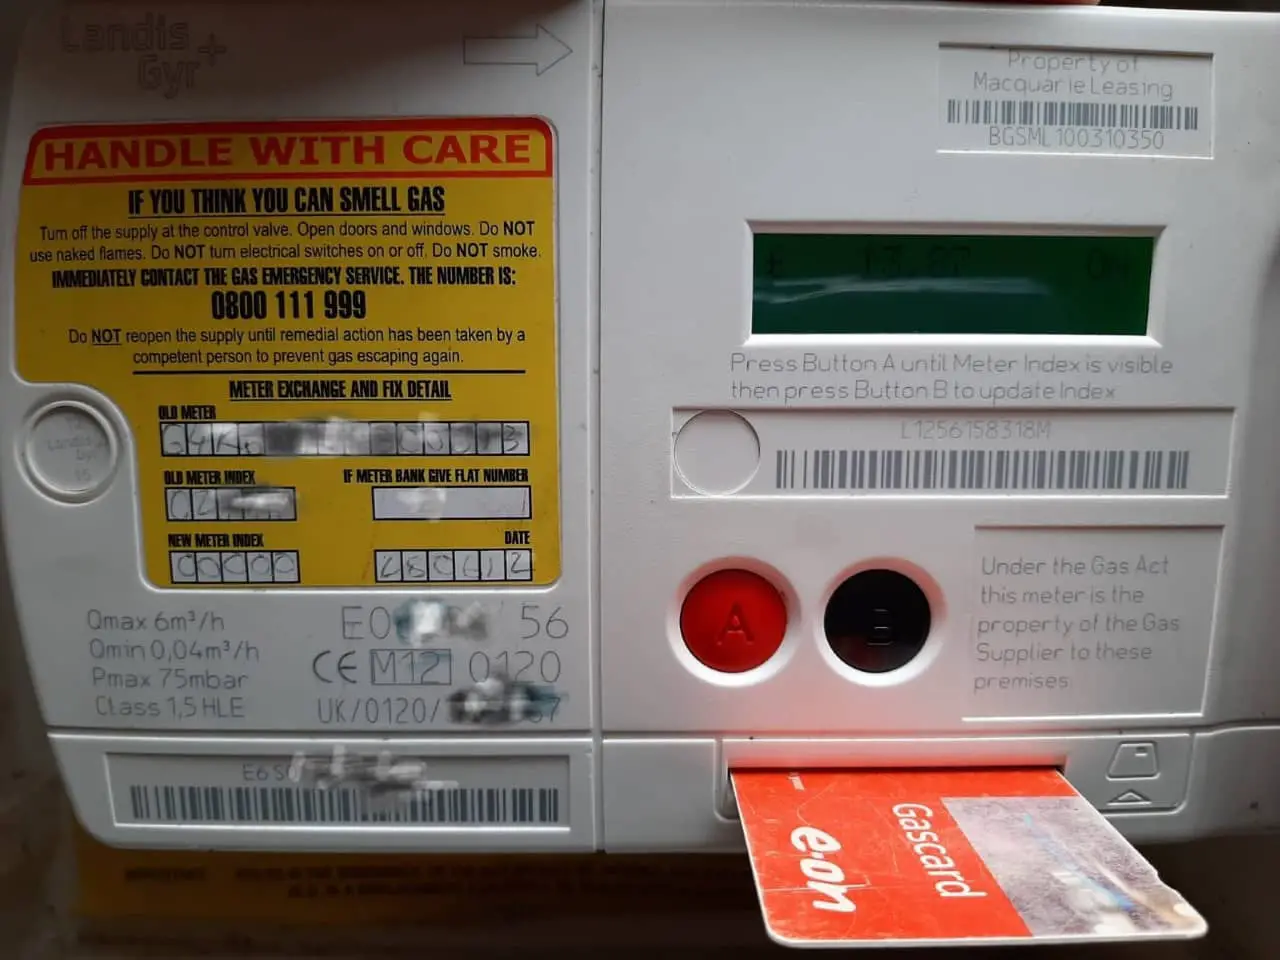 A prepay meter with card inserted